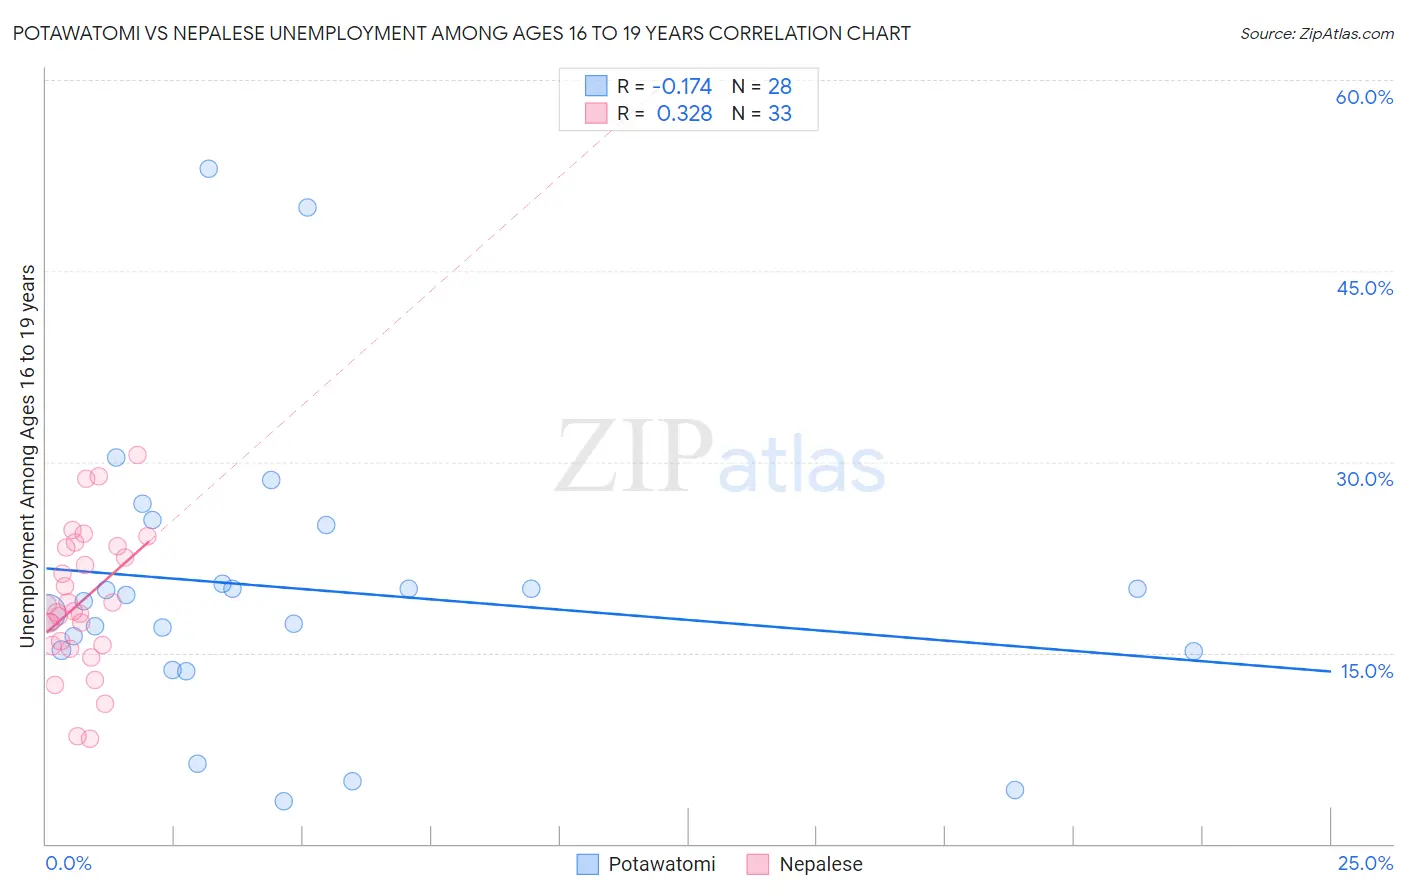 Potawatomi vs Nepalese Unemployment Among Ages 16 to 19 years